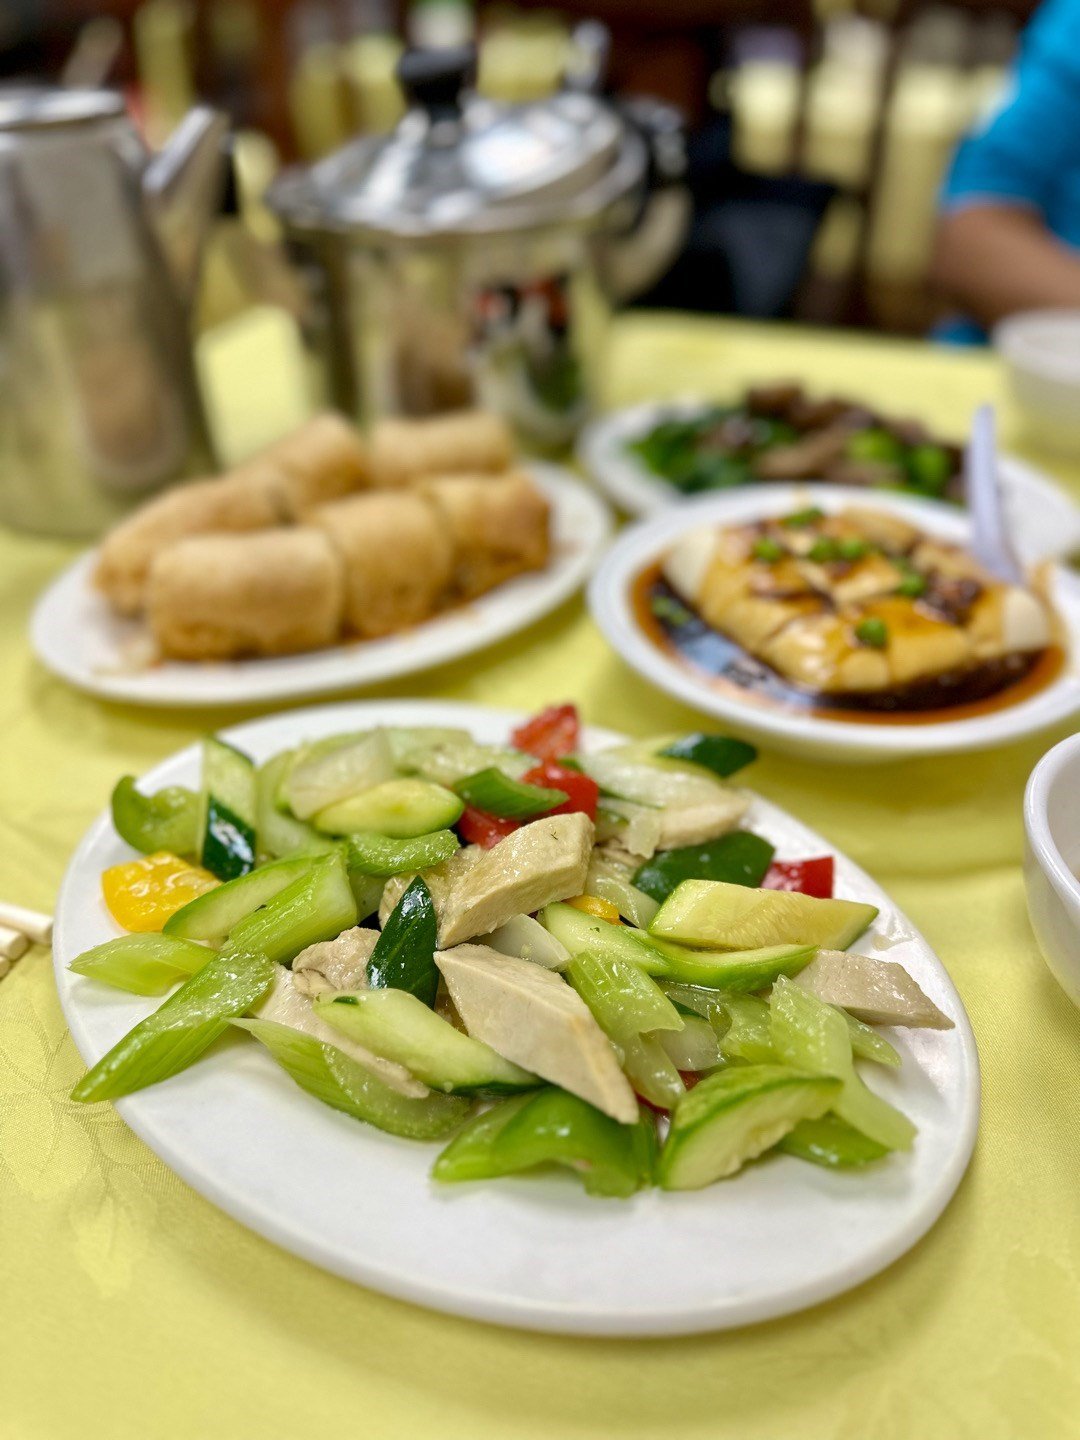 Fresh Mix Vegetable with Bean Curd Sheet (碧綠腐球片) and more - alternate choice